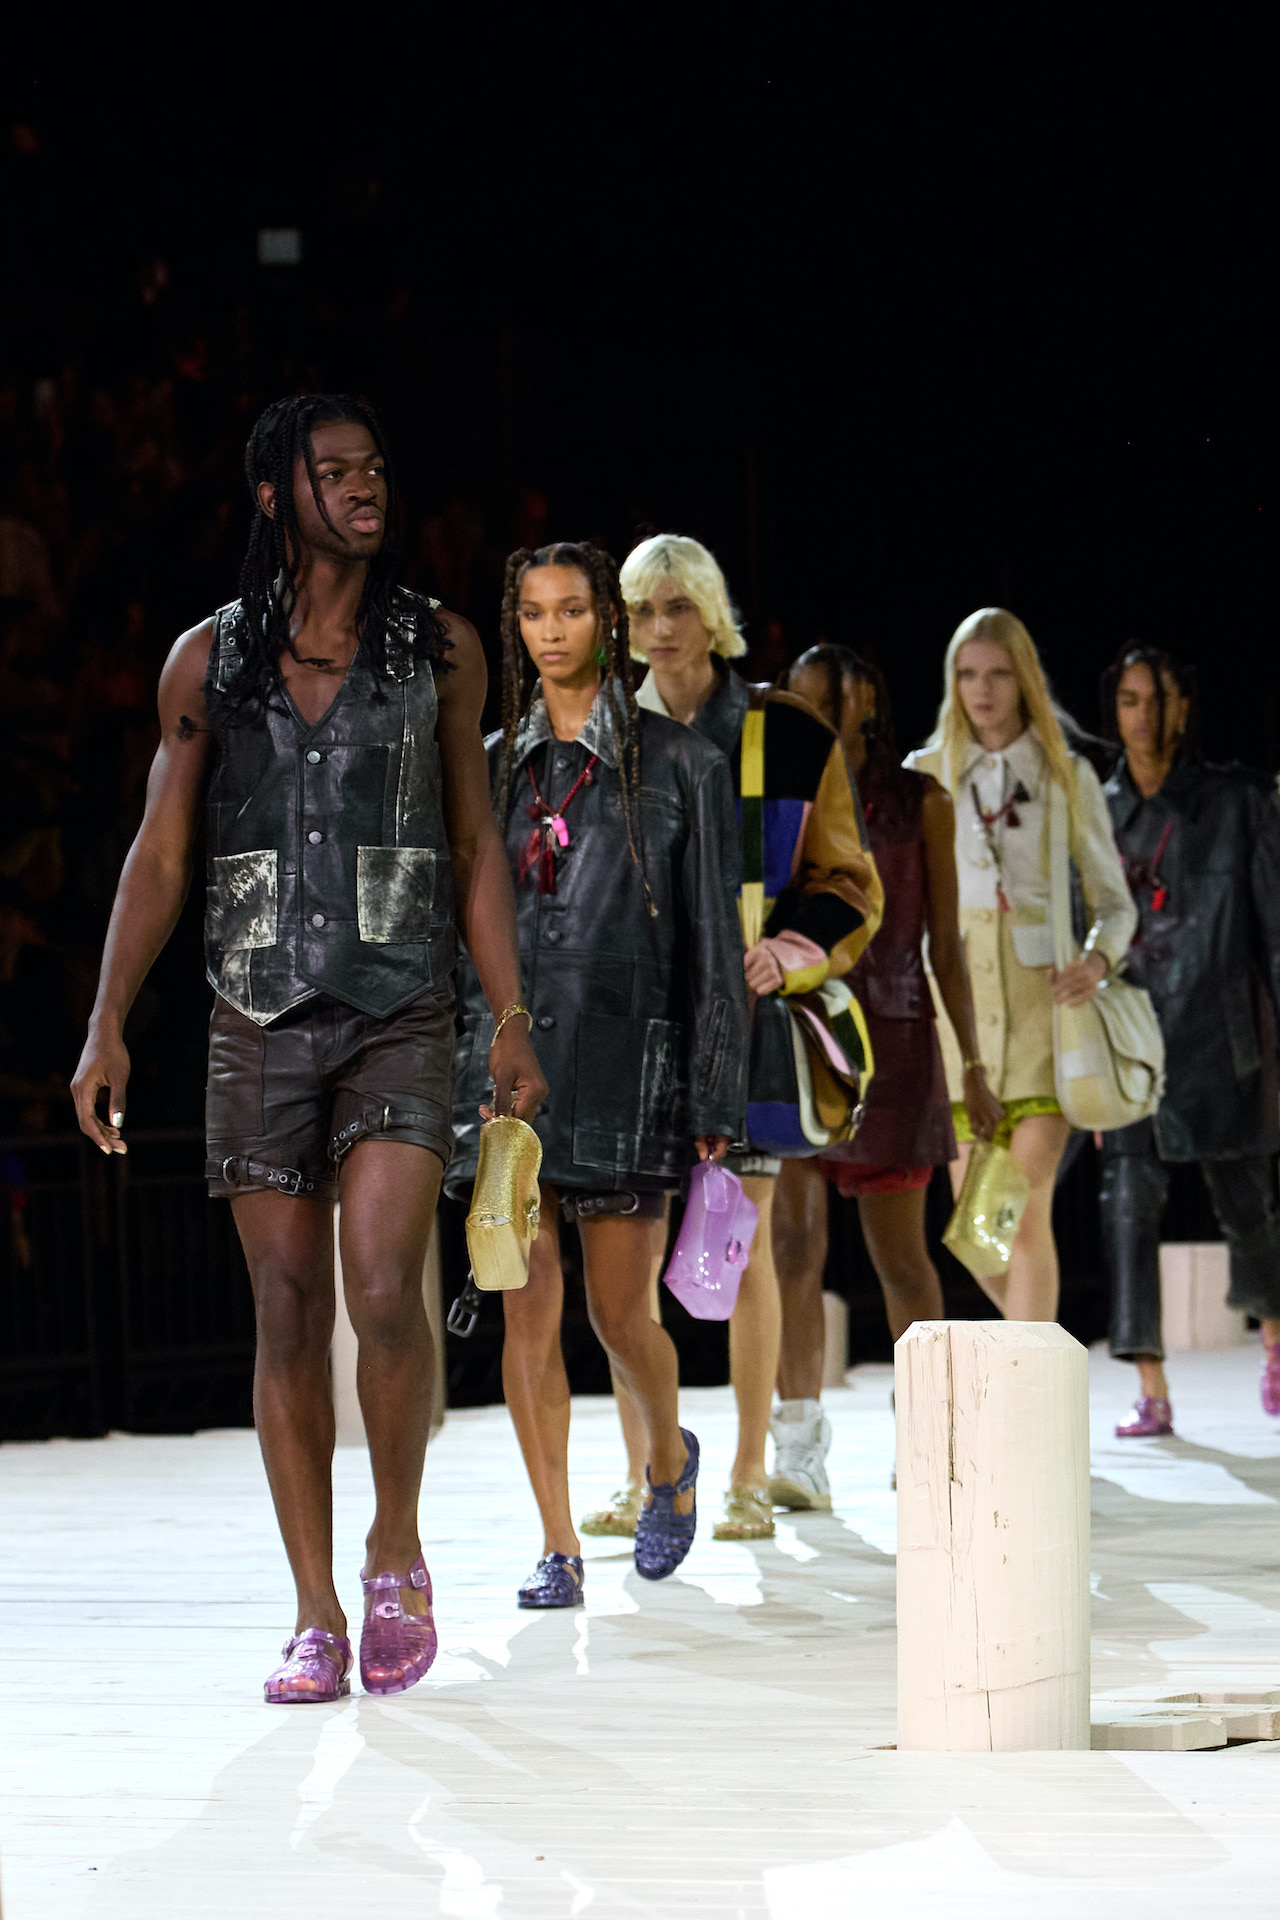 Louis Vuitton creates clothes for the modern elite, closing one of